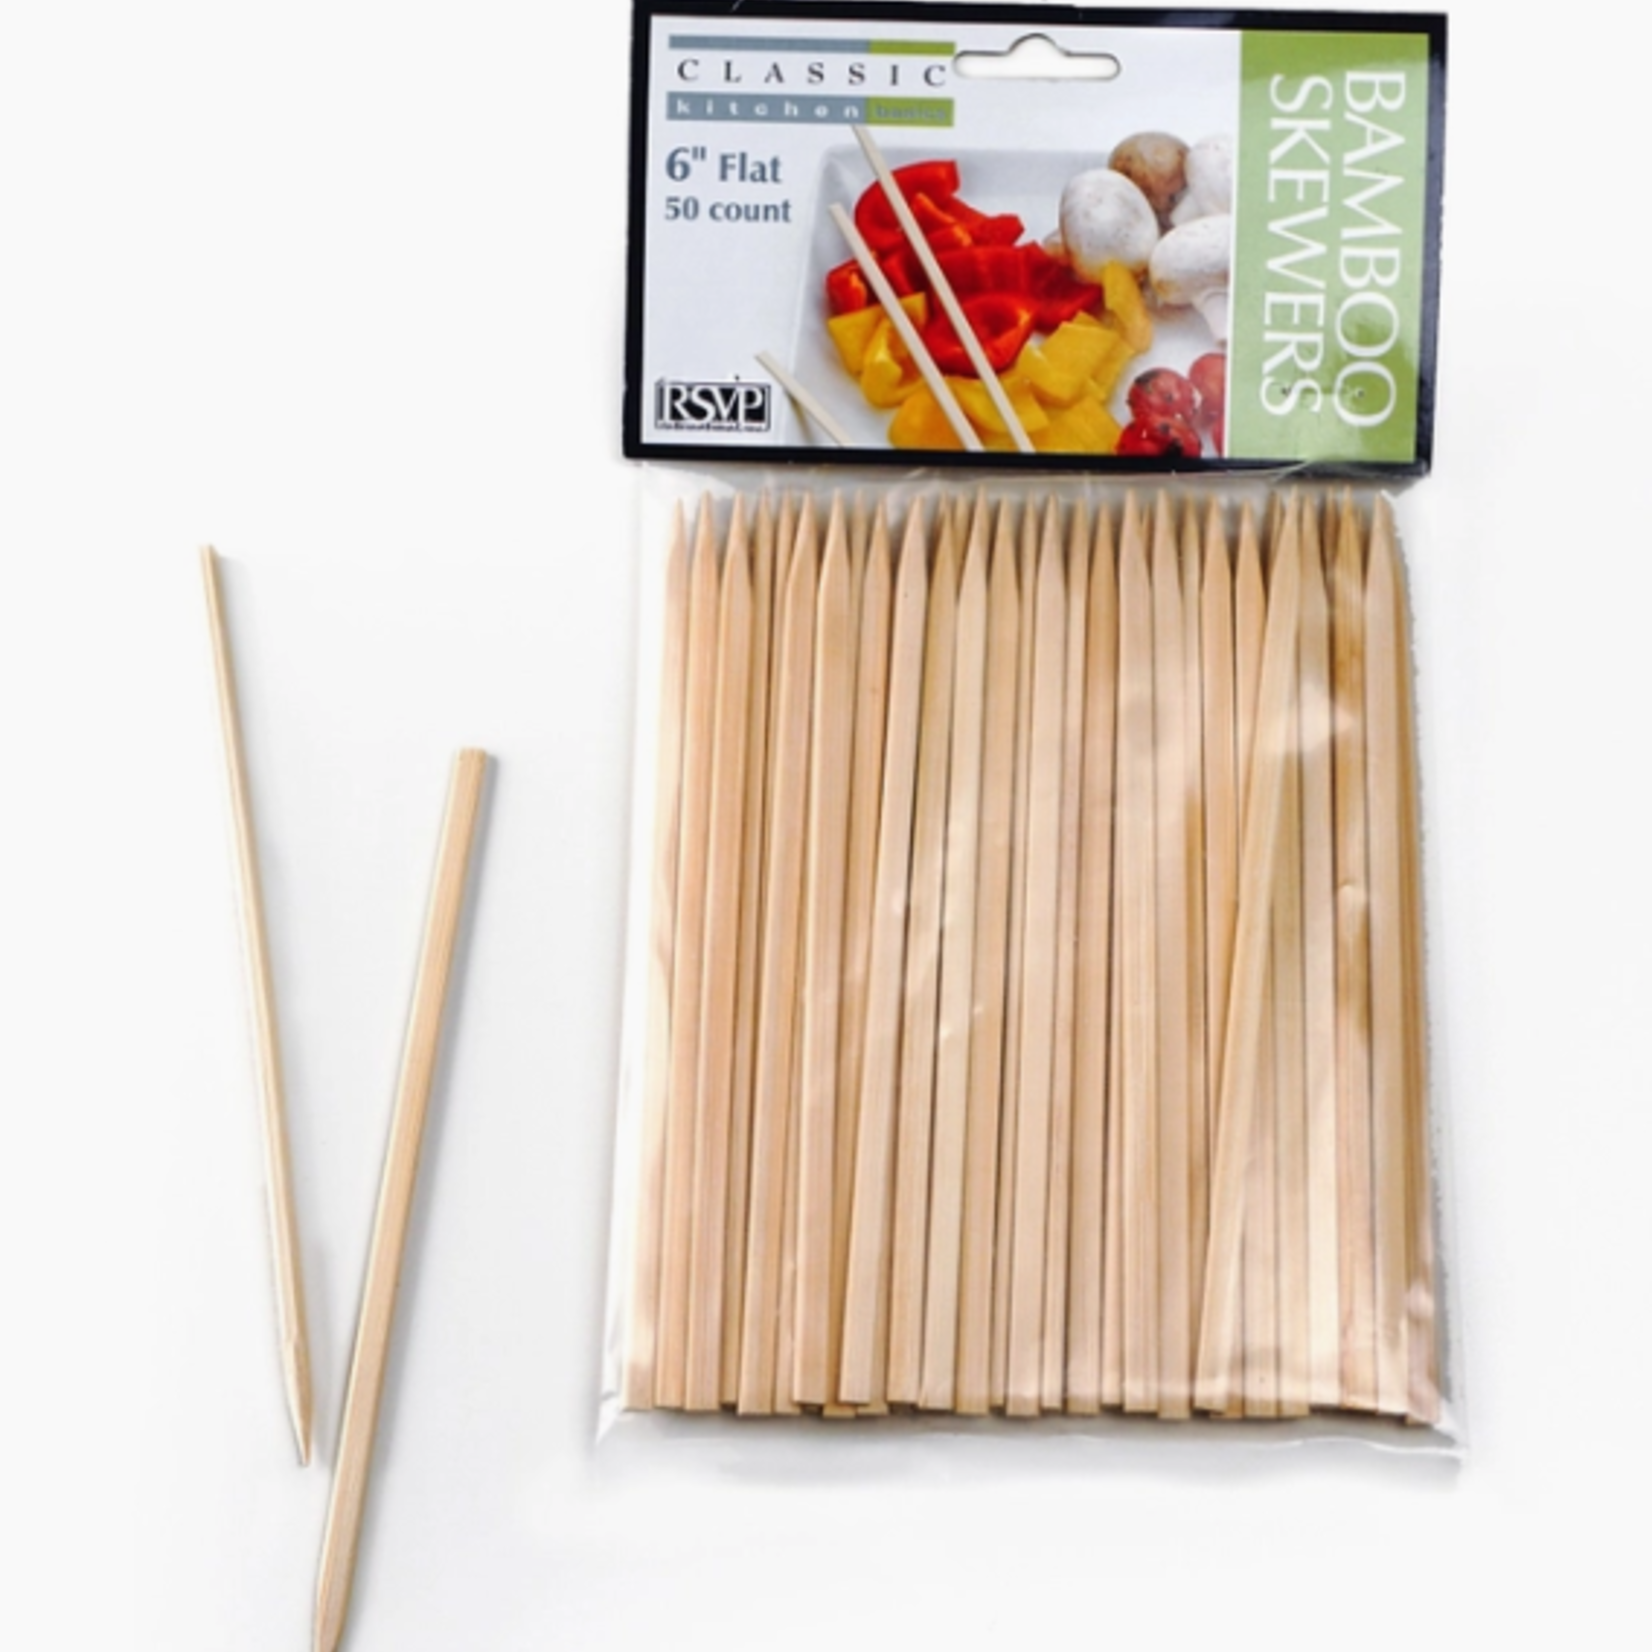 RSVP Bamboo Skewer 6in Flat- 50 Count